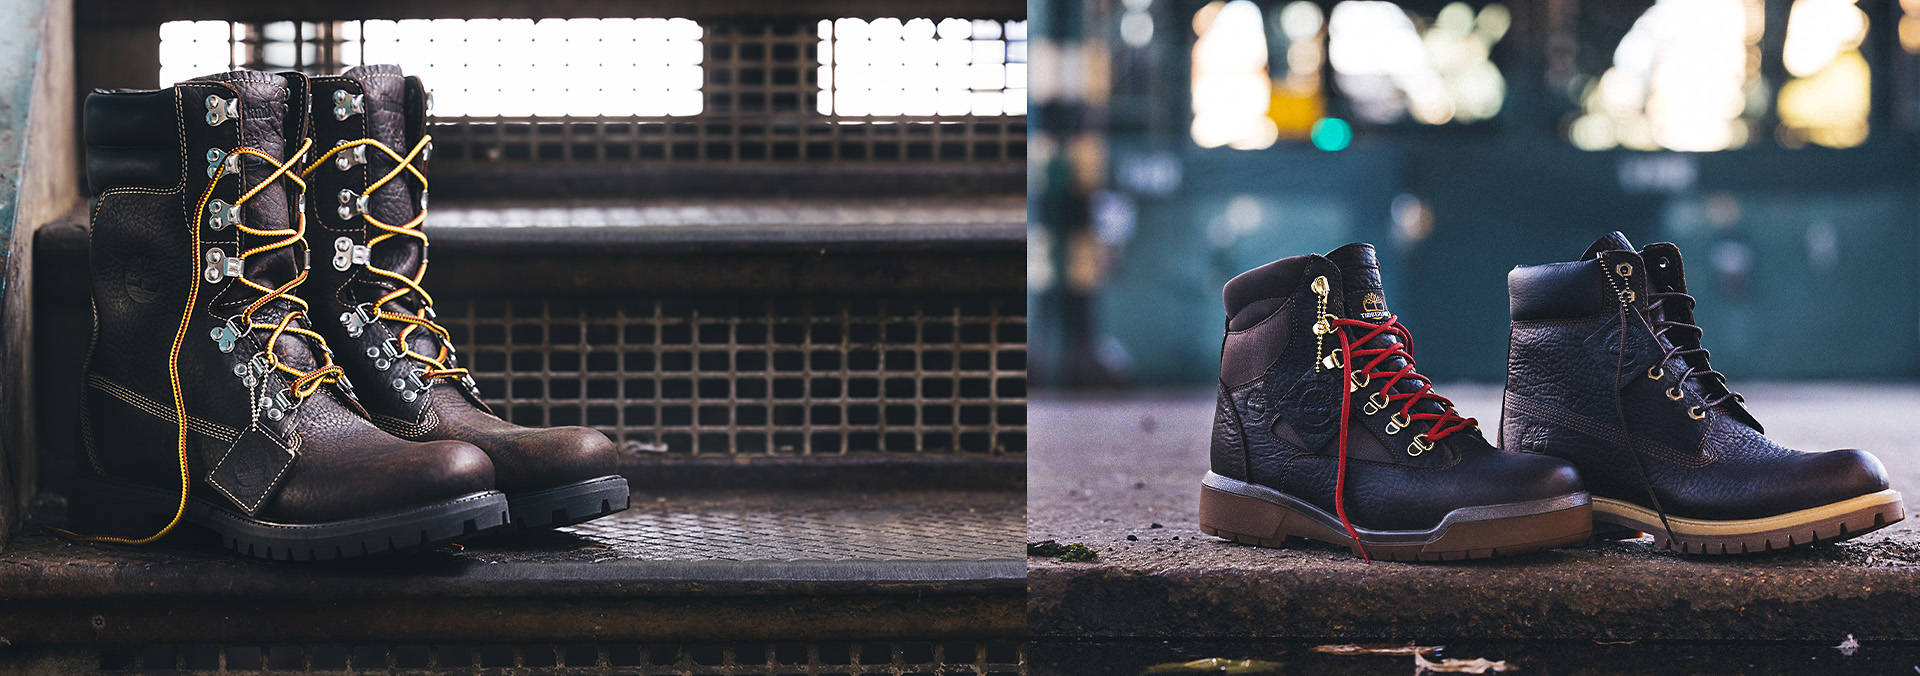 Split image - the left image is of the Timberland Super Boots on a subway platform. The right image is of the Timberland Field Boot and 6-Inch Premium Boot on top of a New York City sidewalk.